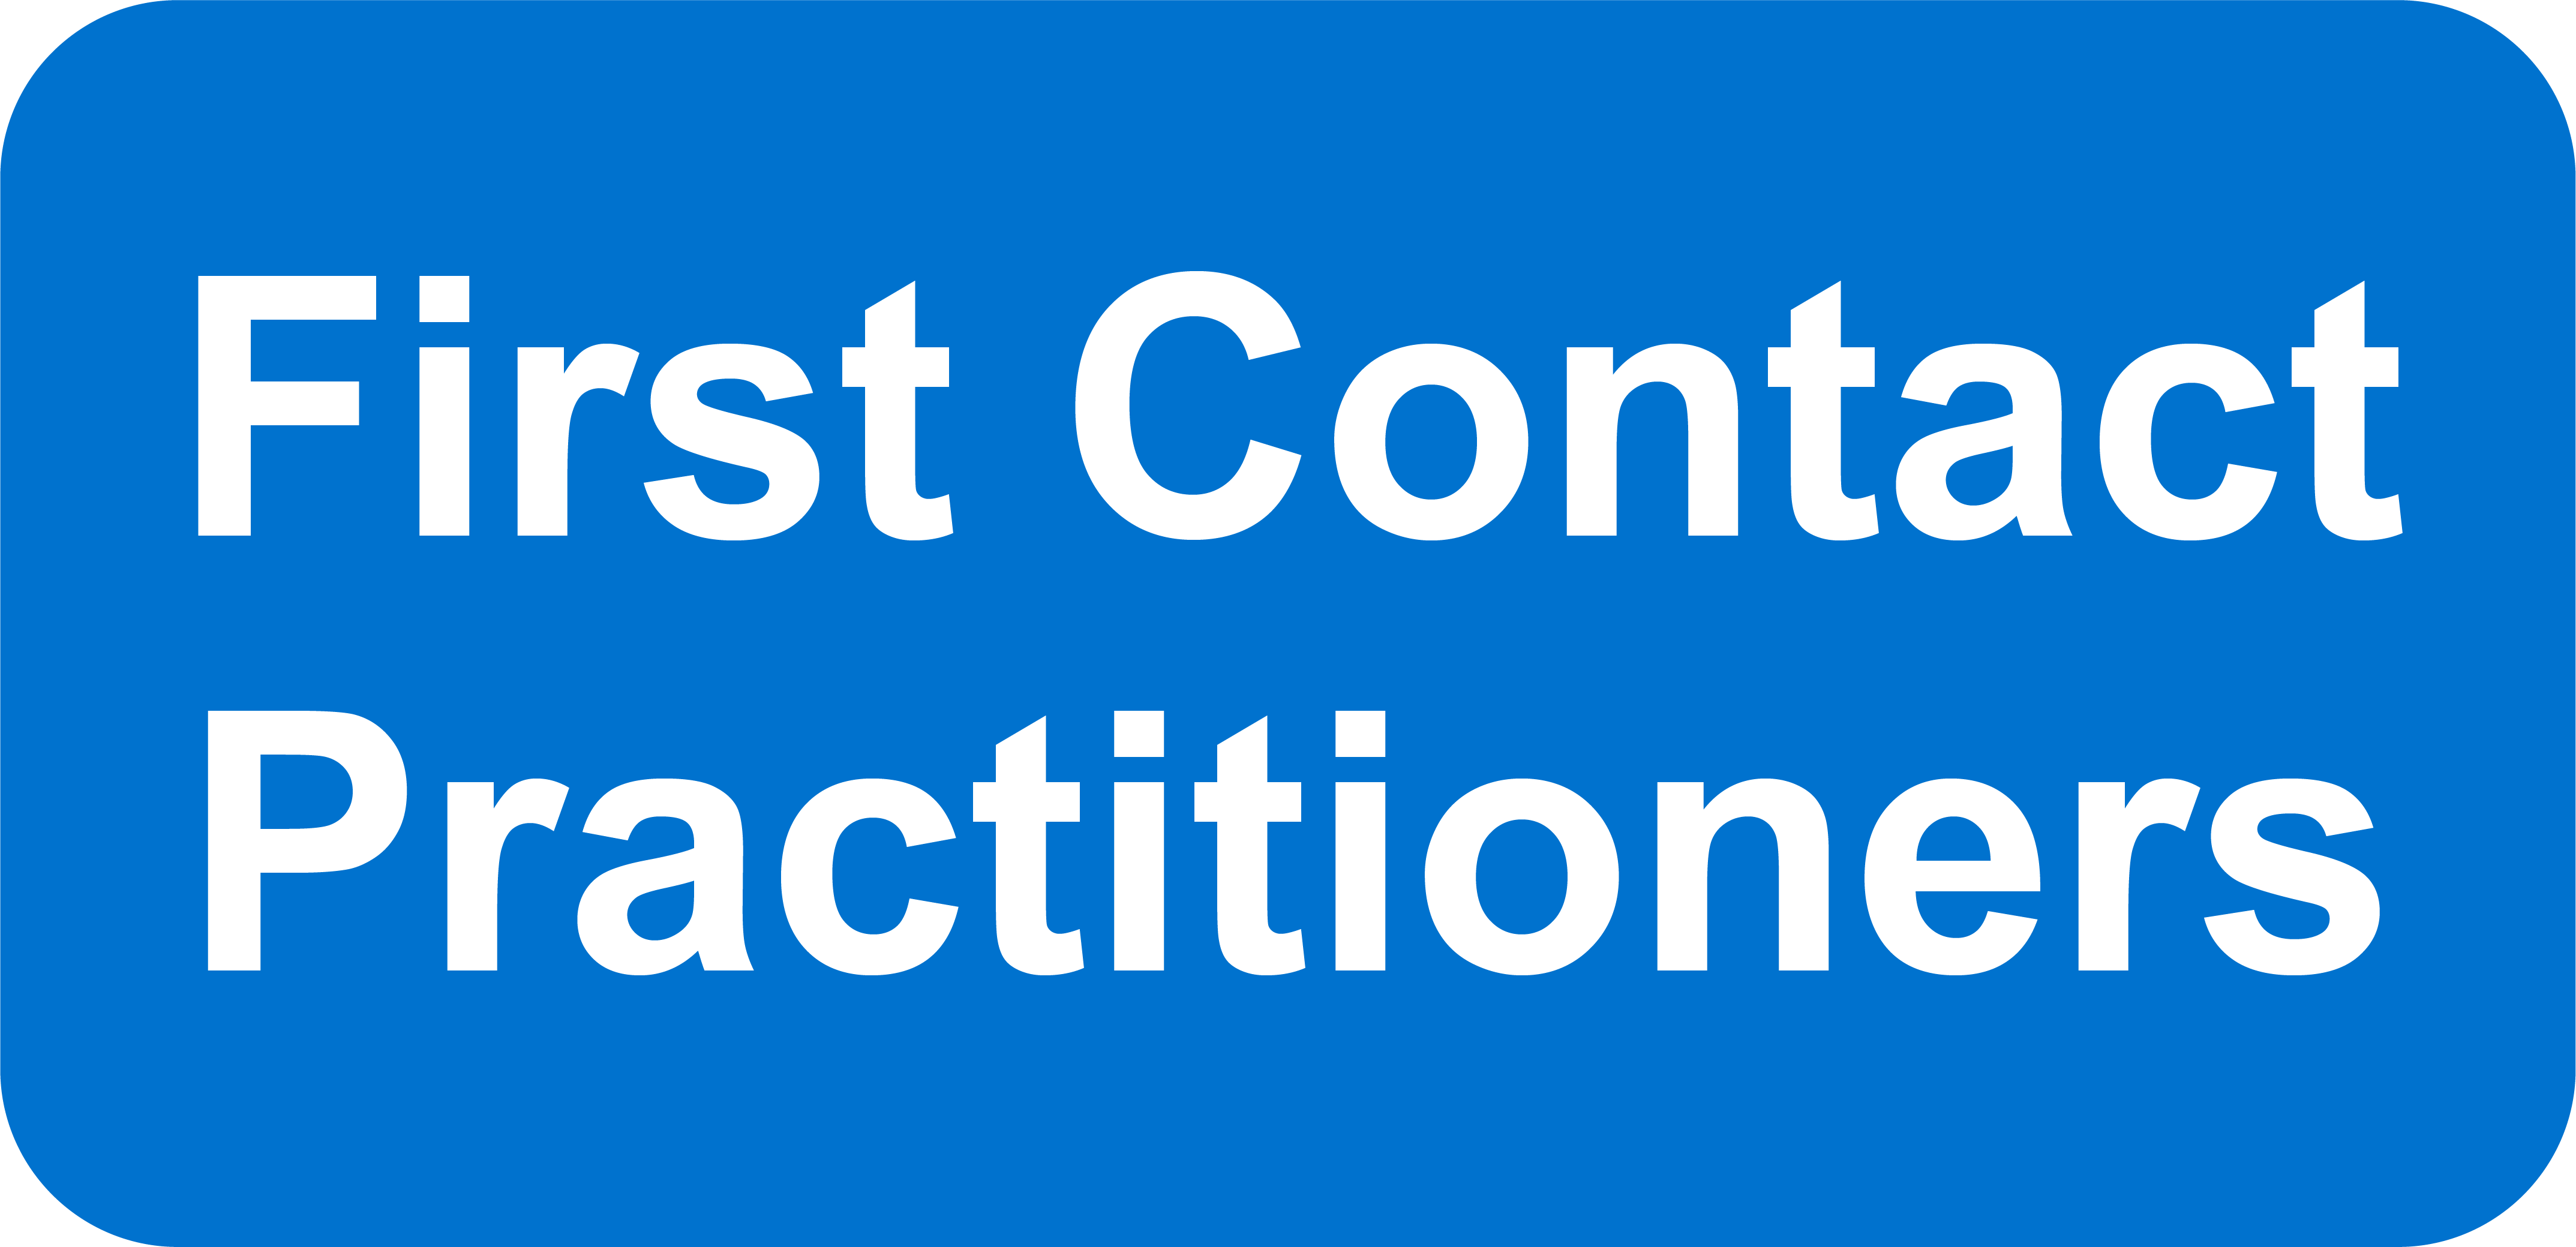 First Contact Practitioners